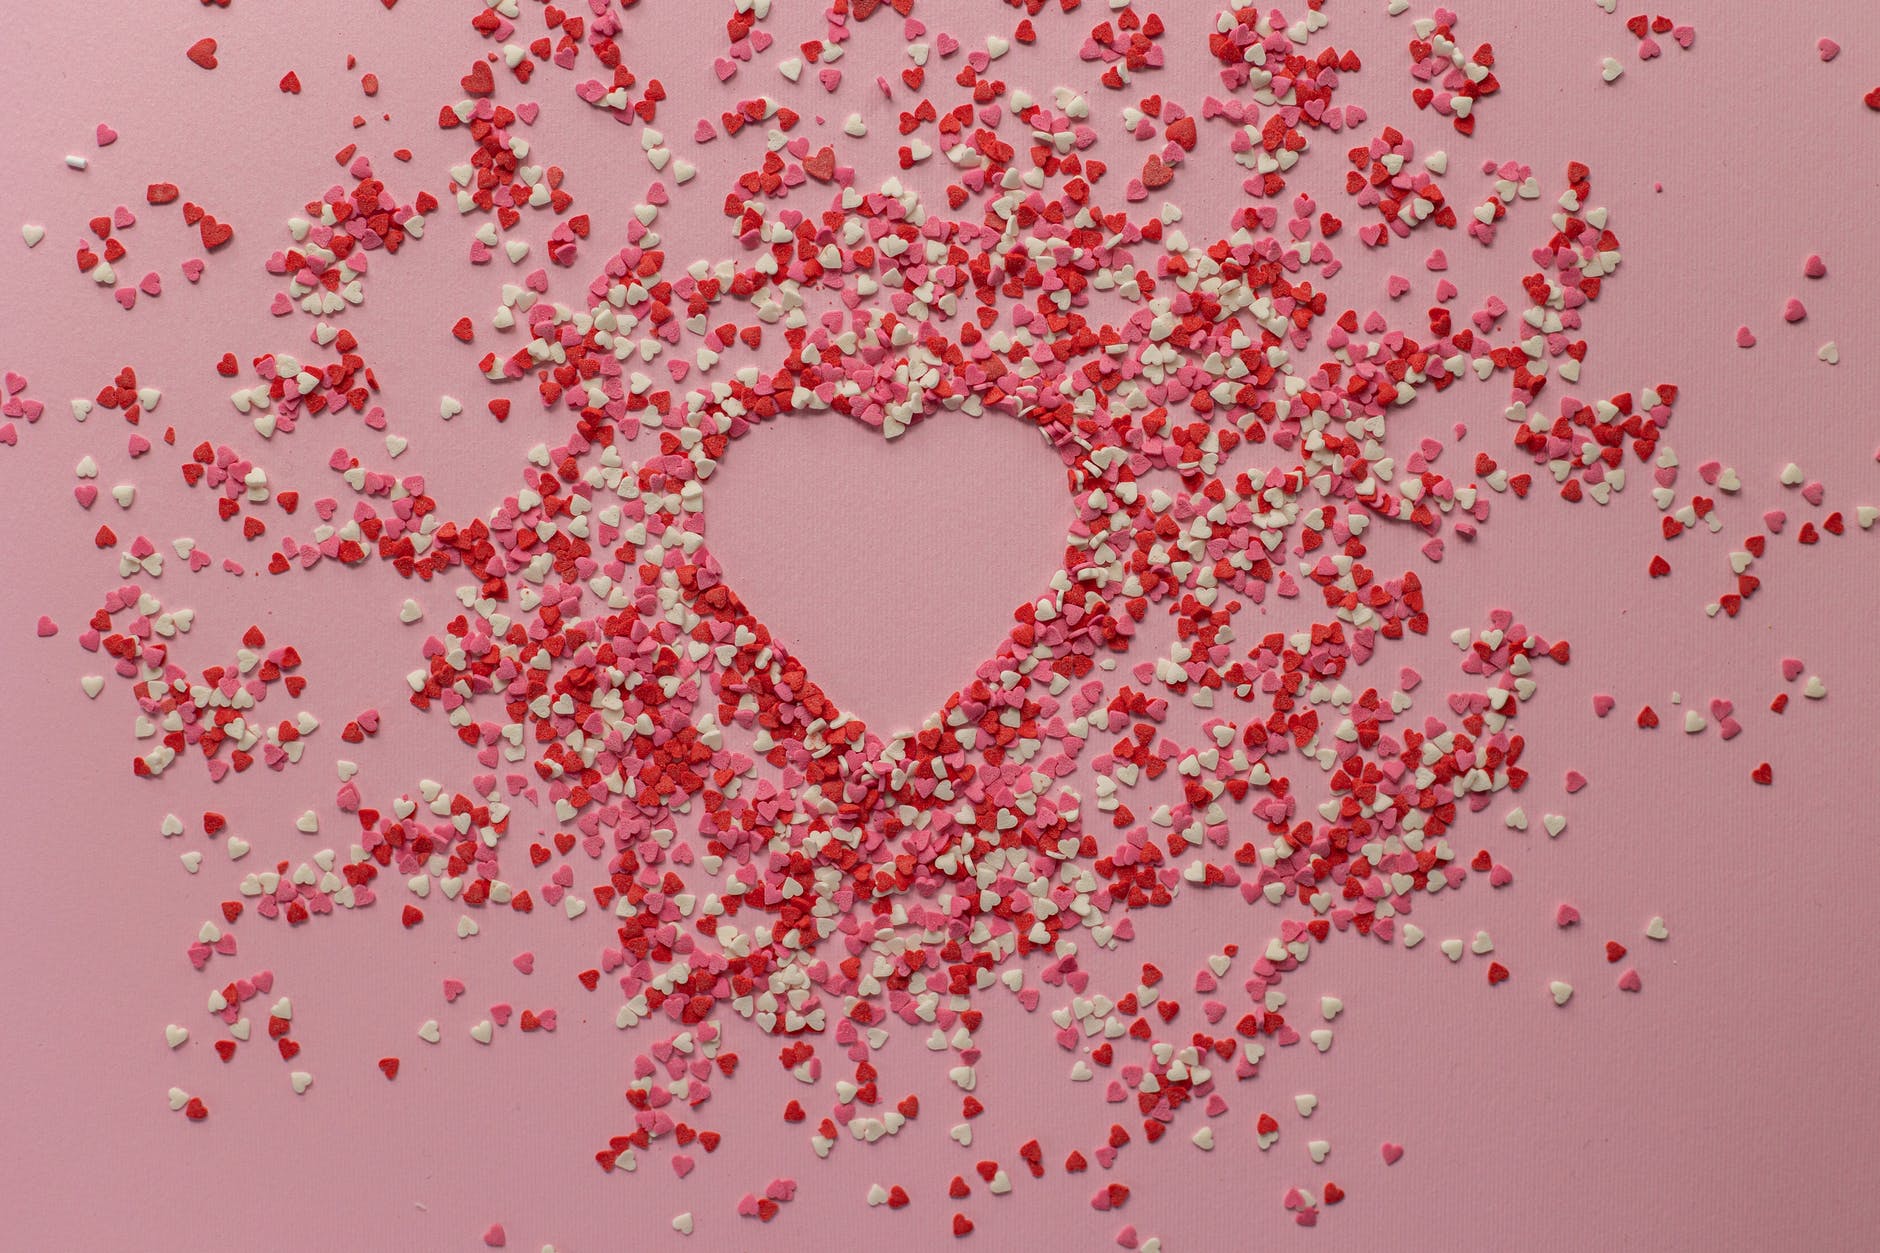 confetti with heart shape on surface